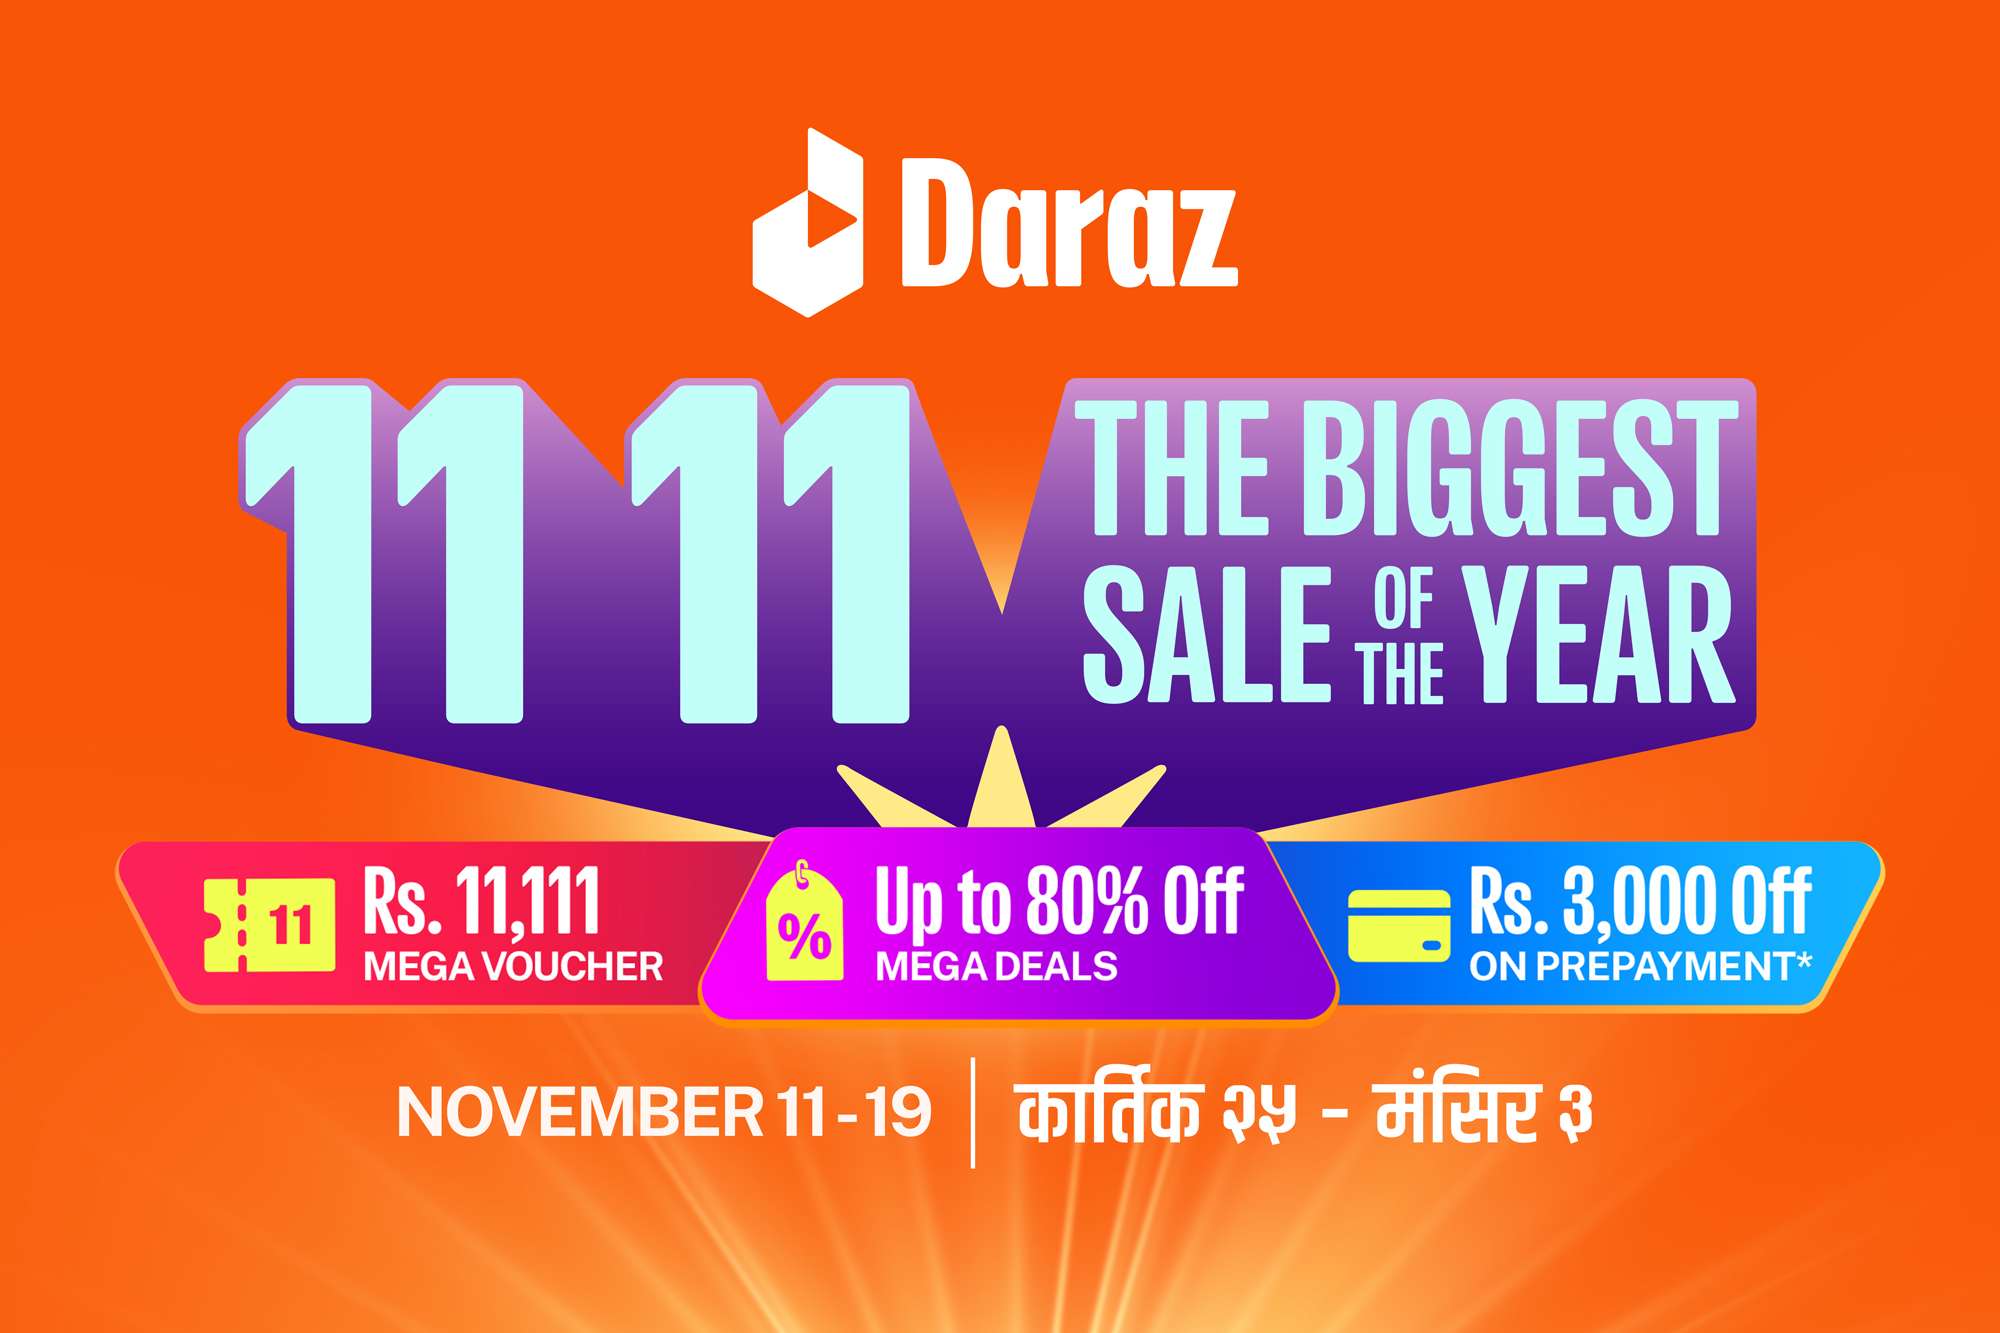 Daraz announces sale of the year up to 80% off, mega vouchers up to Rs 11,111